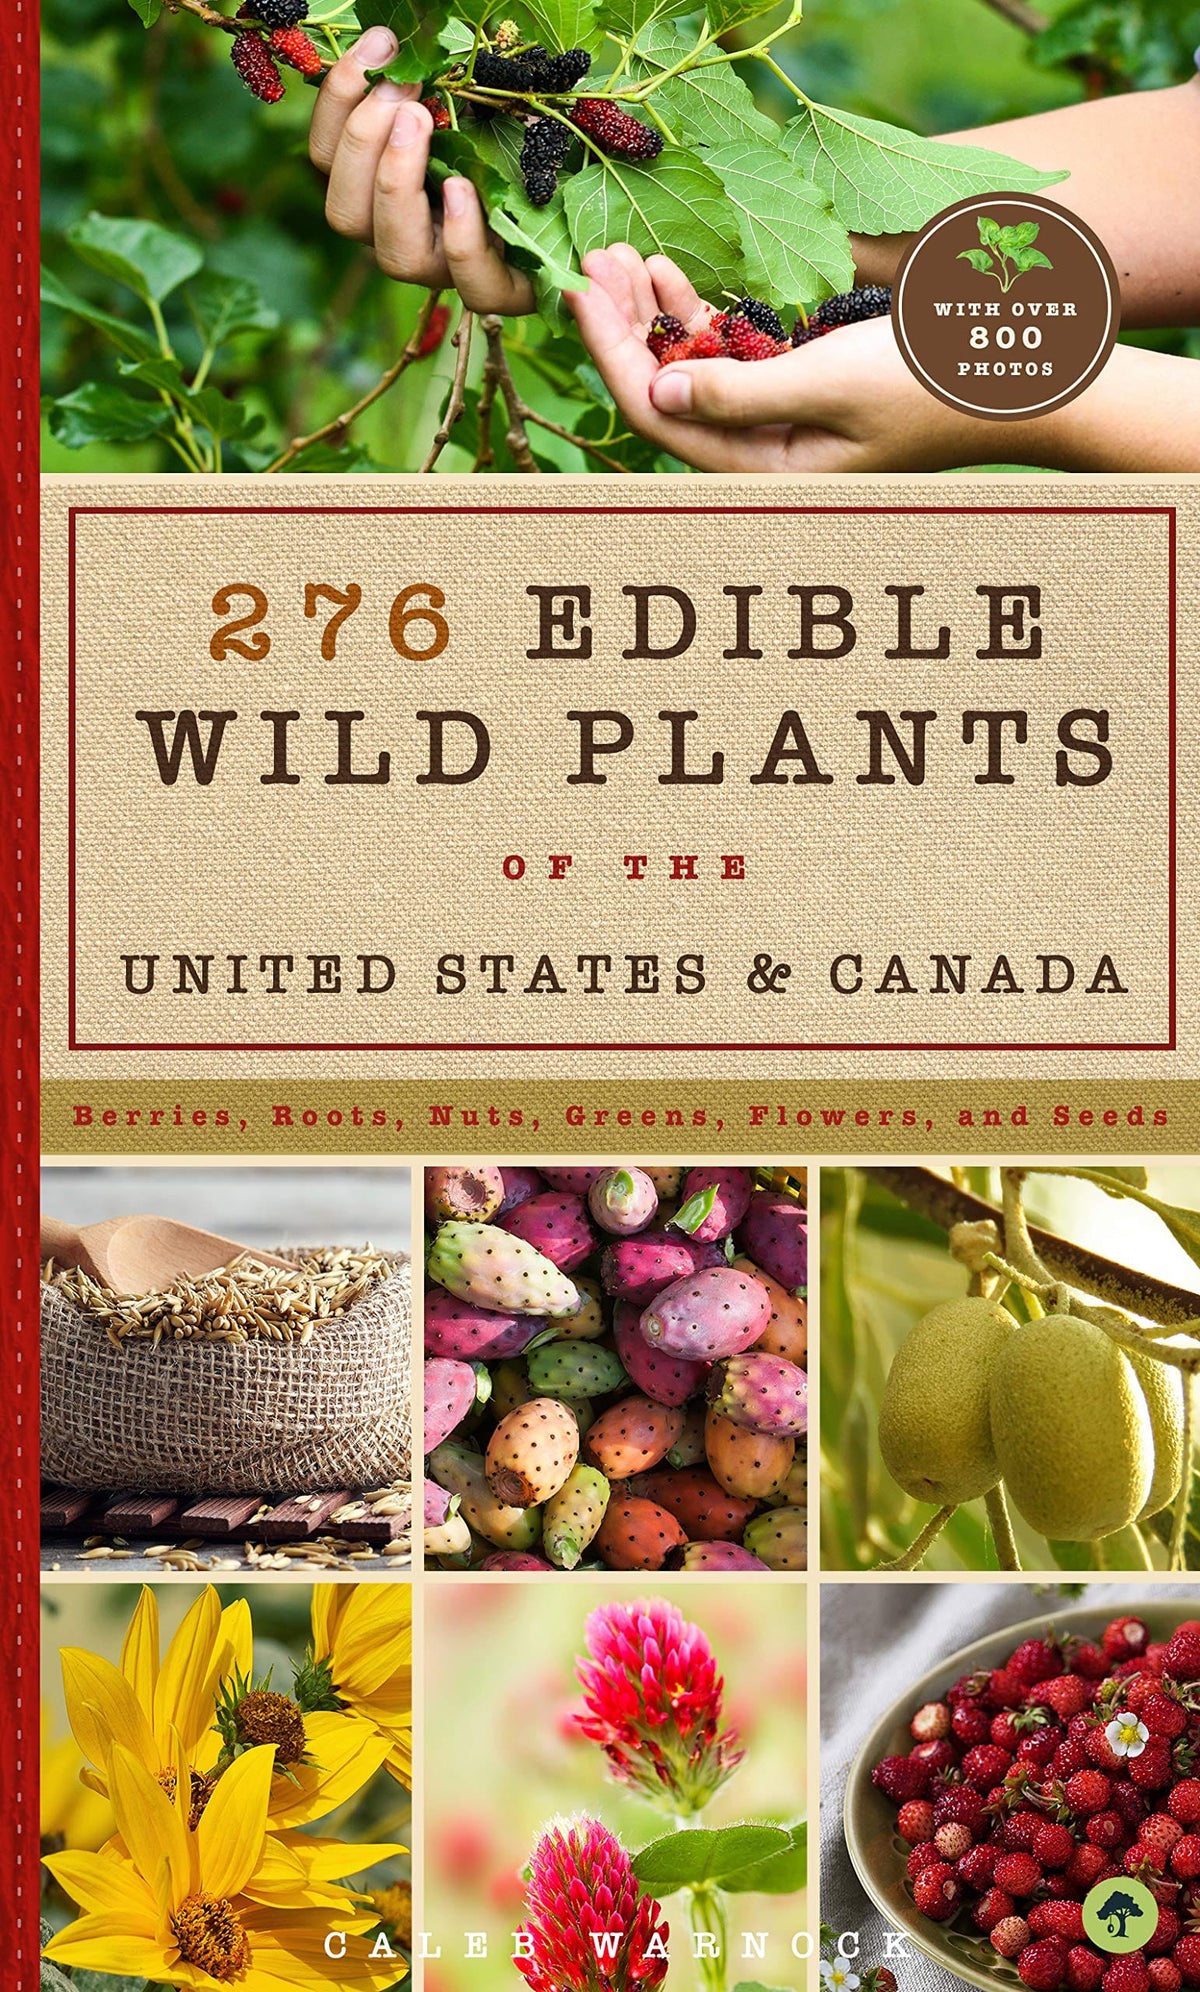 276 Edible Wild Plants of the United States and Canada - Third Eye